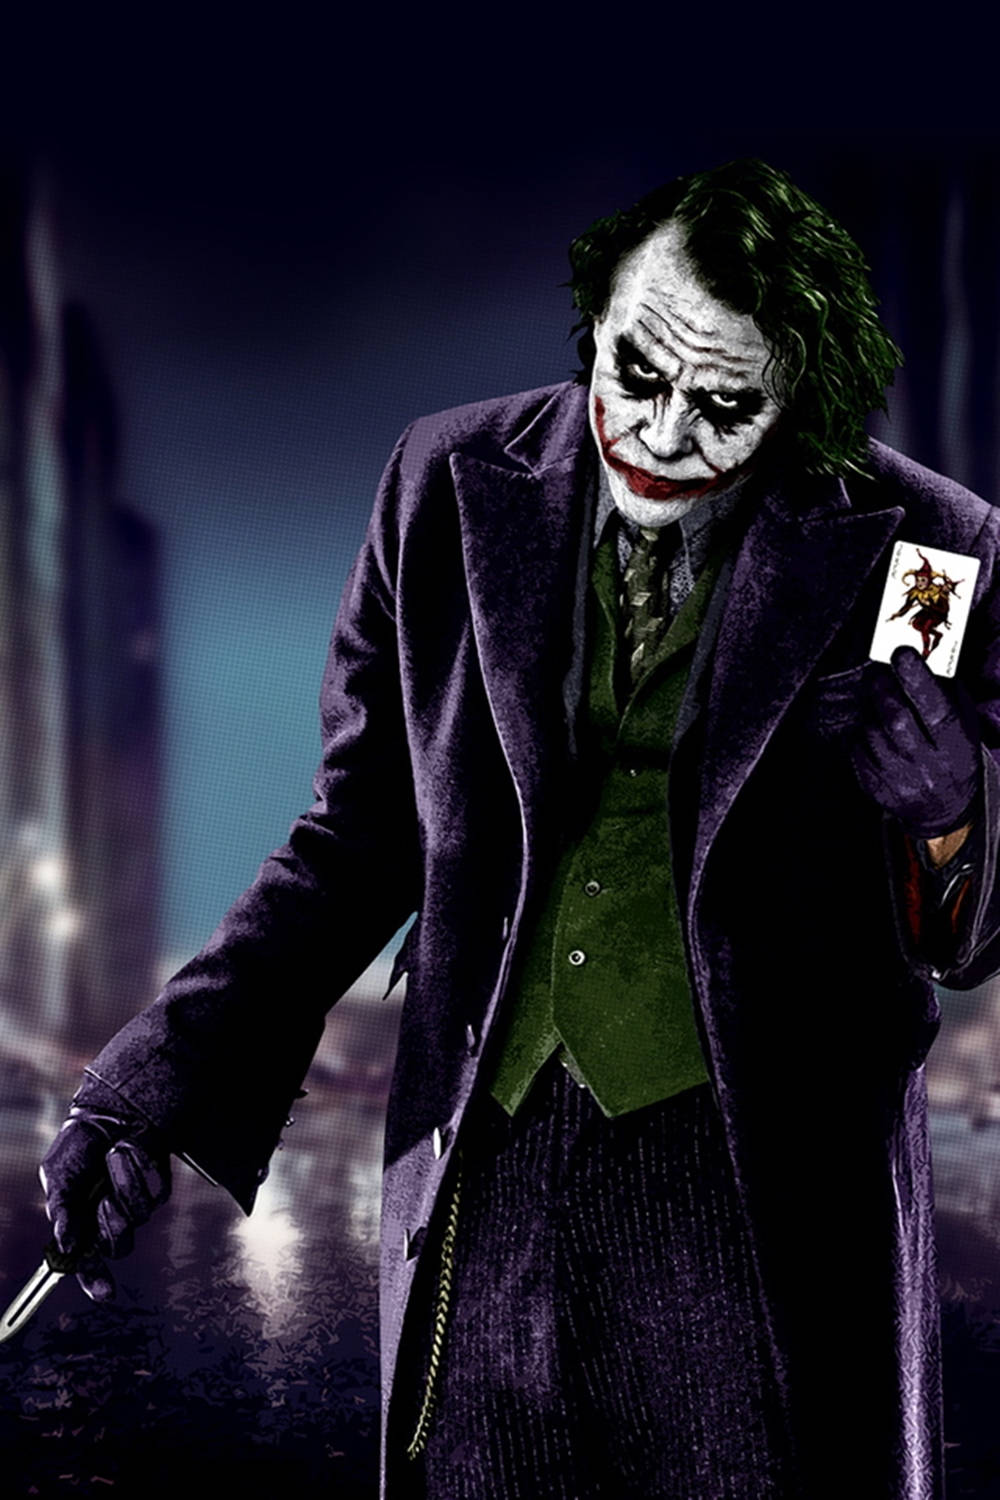 Laugh Out Loud With The Joker In Pubg